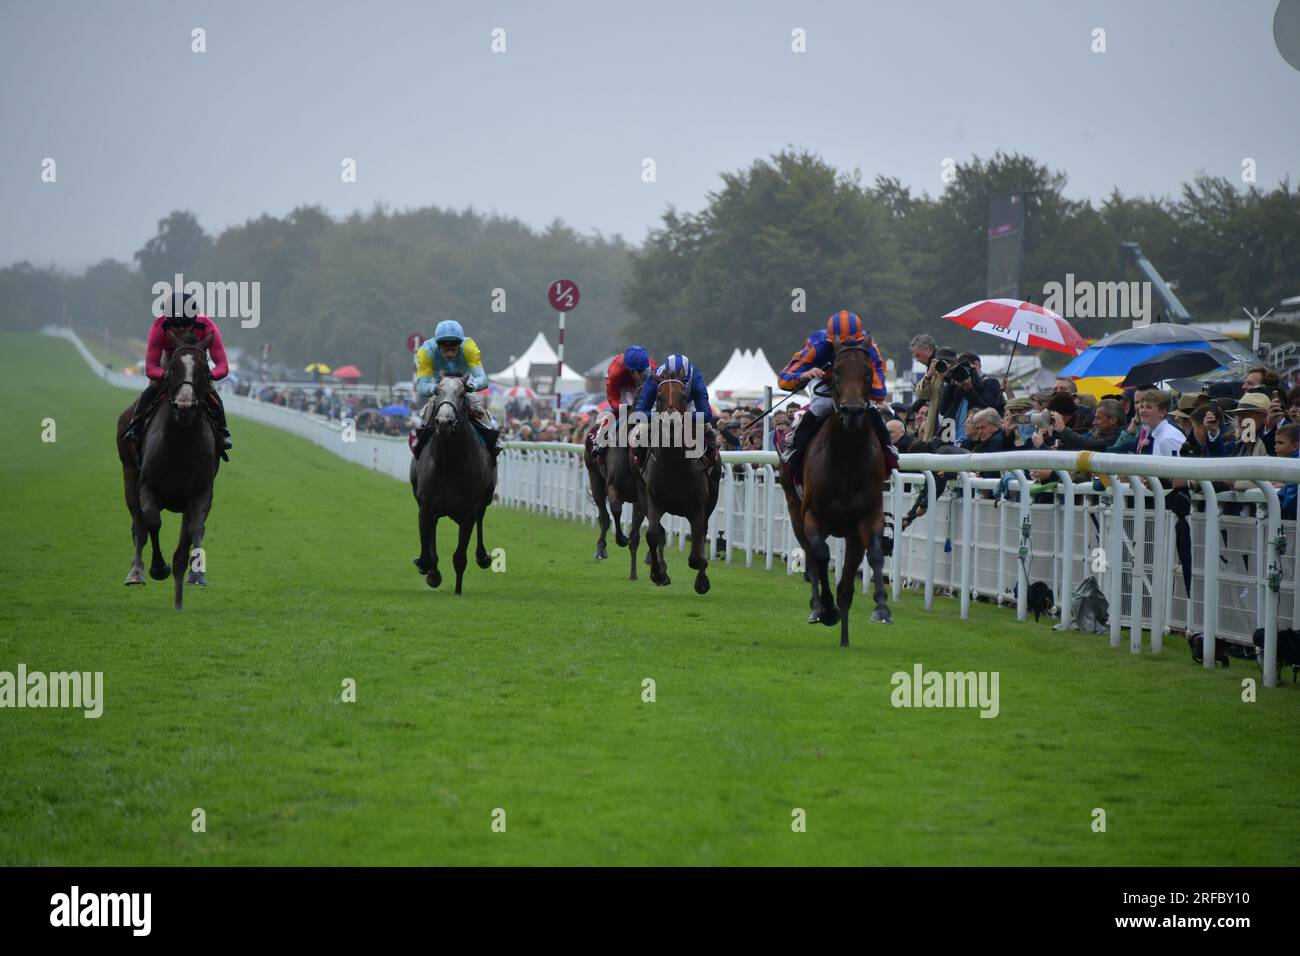 Goodwood, UK. 2nd August 2023. Paddington (blue and orange striped cap), ridden by Ryan Moore, wins the 15.35 Qatar Sussex Stakes ahead of Facteur Cheval (far left), ridden by Maxime Guyon, at Goodwood Racecourse, UK. Credit: Paul Blake/Alamy Live News. Stock Photo